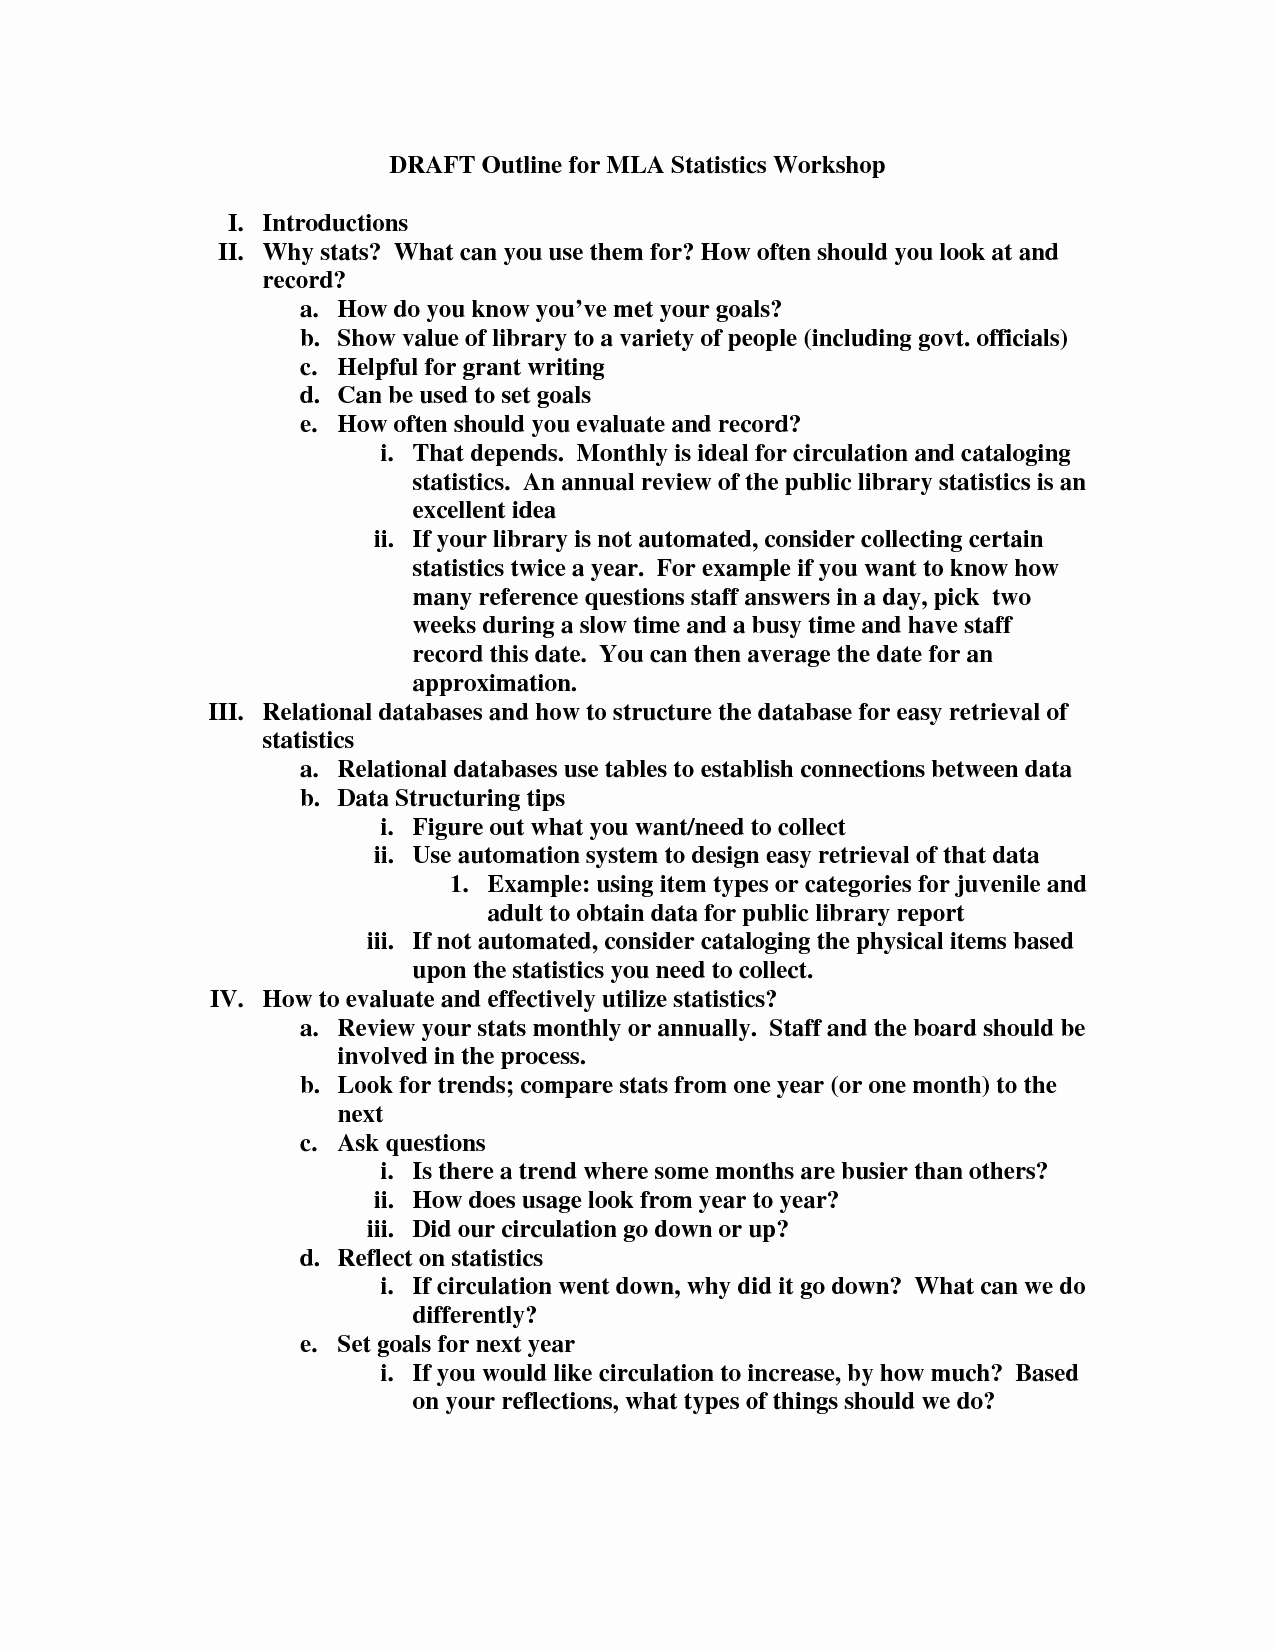 Sample Research Paper Outline Lovely ️ Outline format for Research Paper Example How to Write